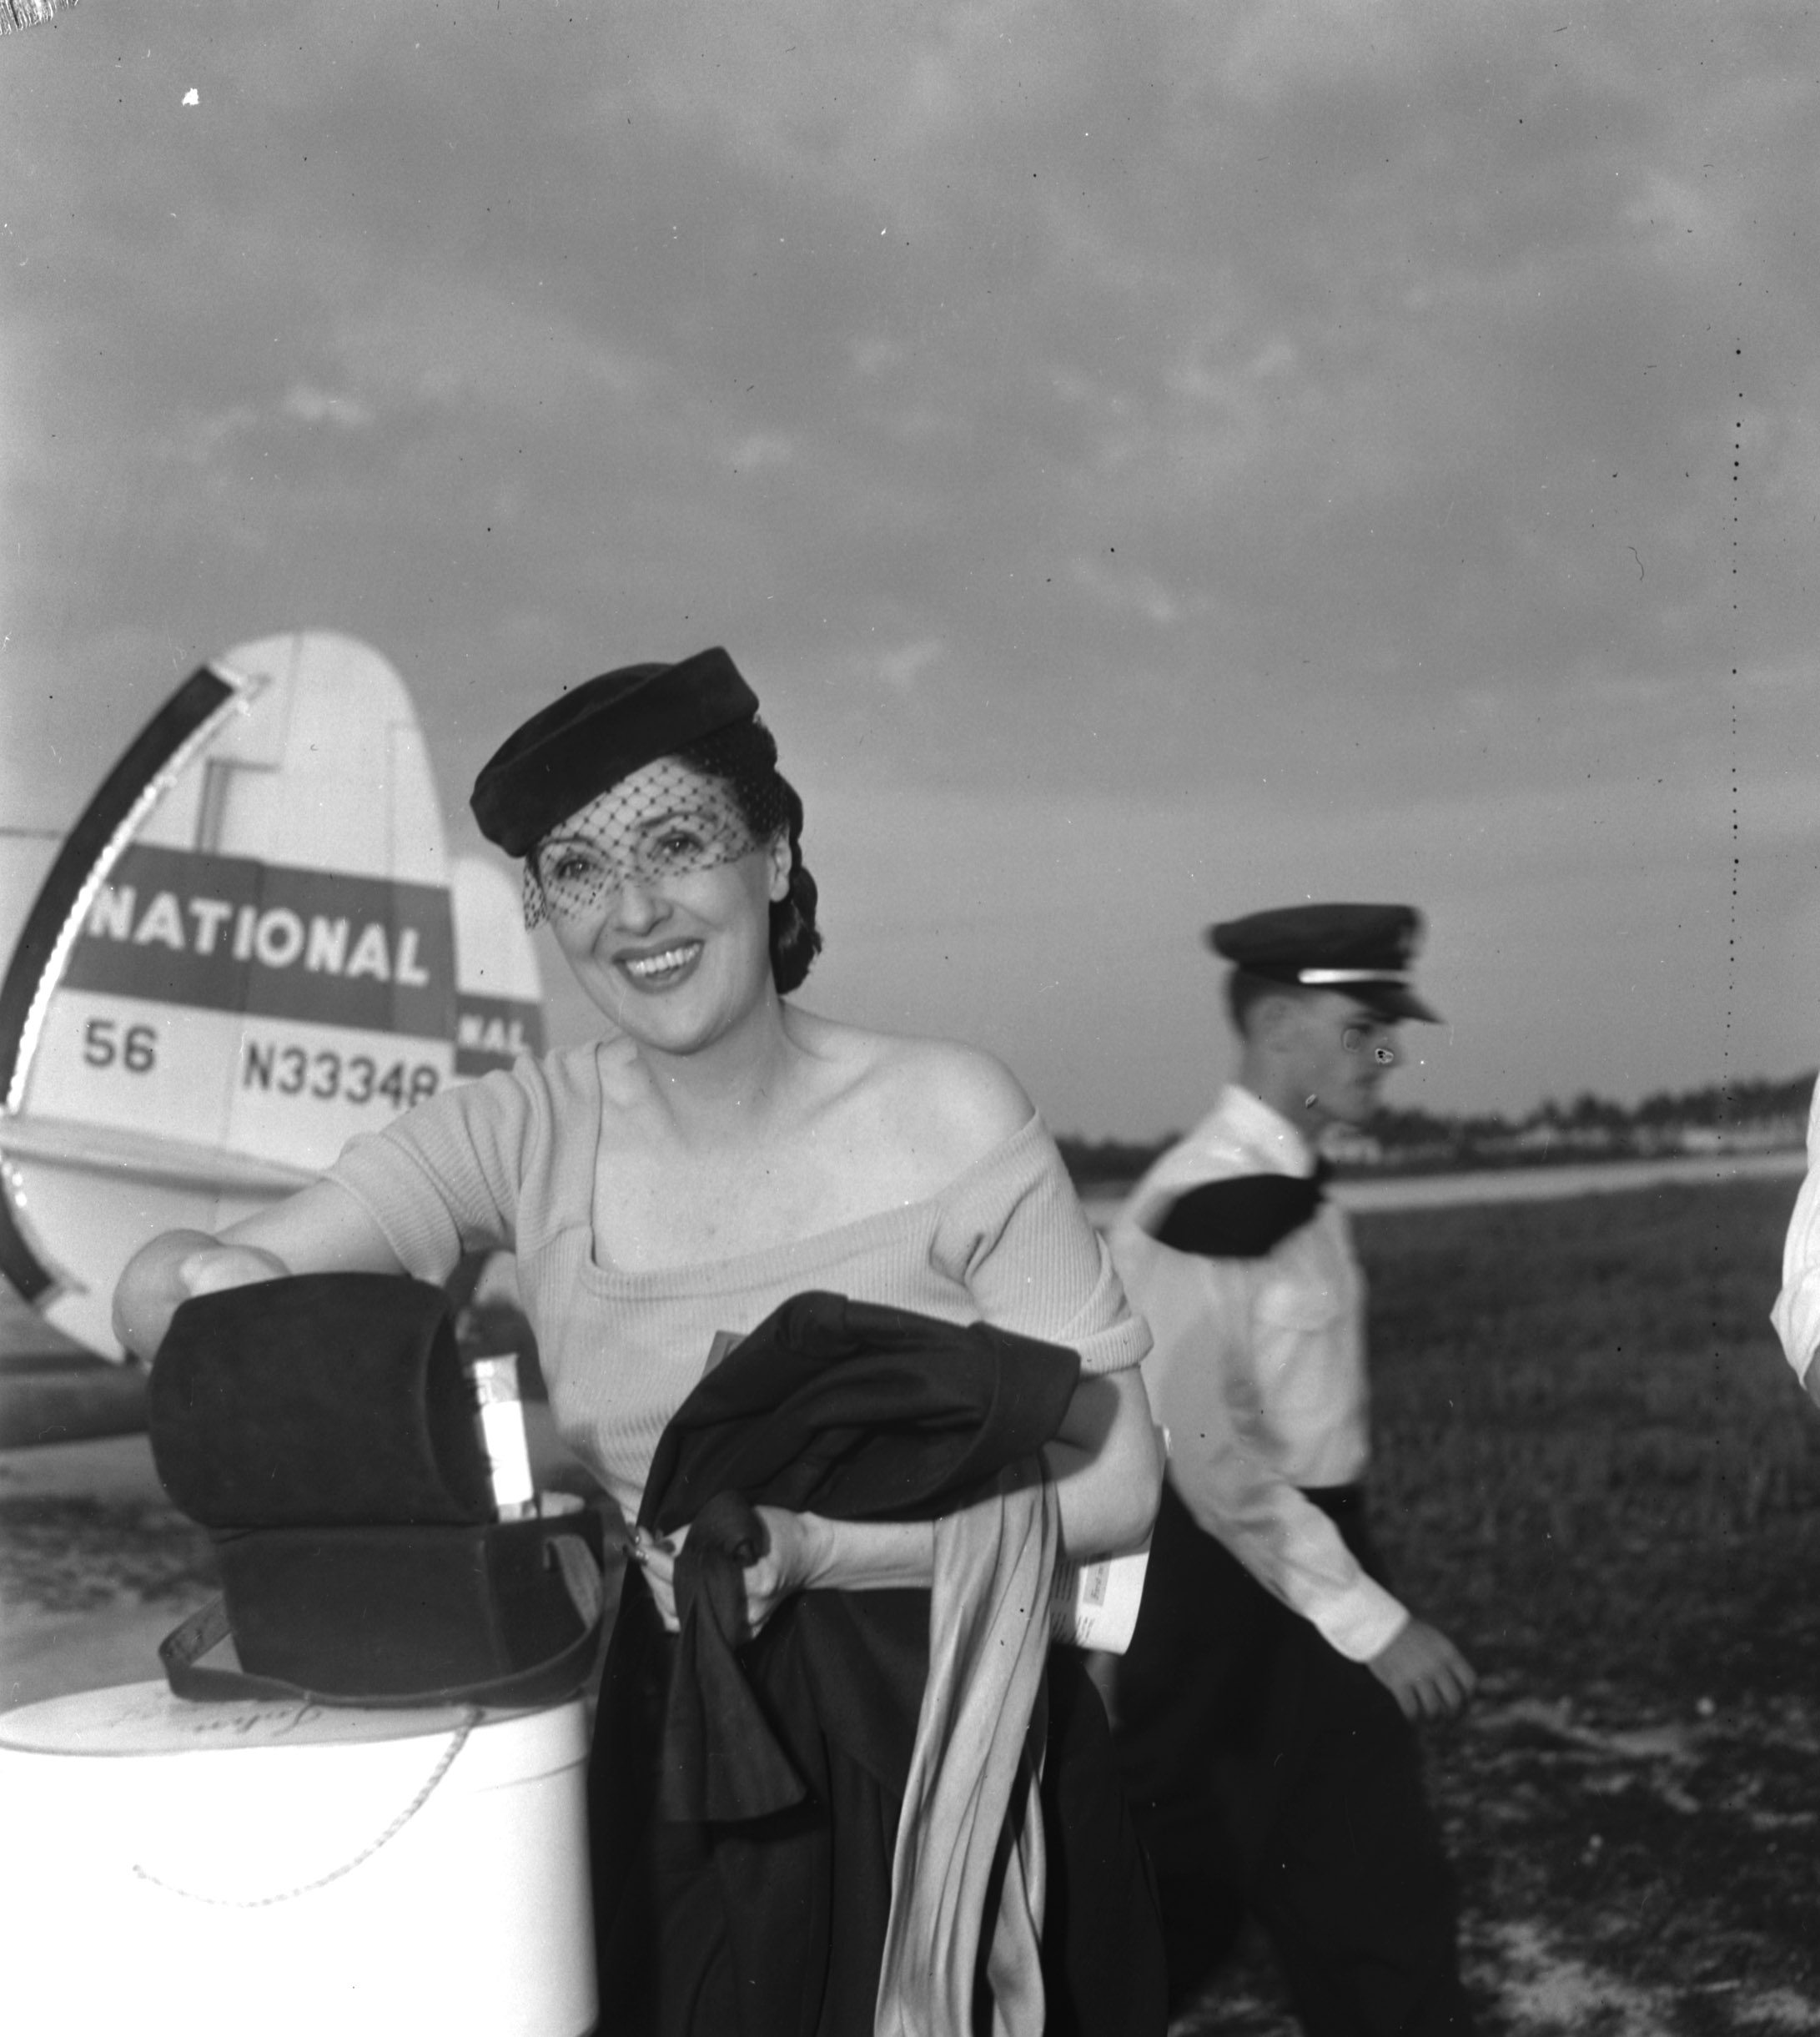 Gypsy Rose Lee at Key West International Airport. Photo from Jeff Broadhead Collection.